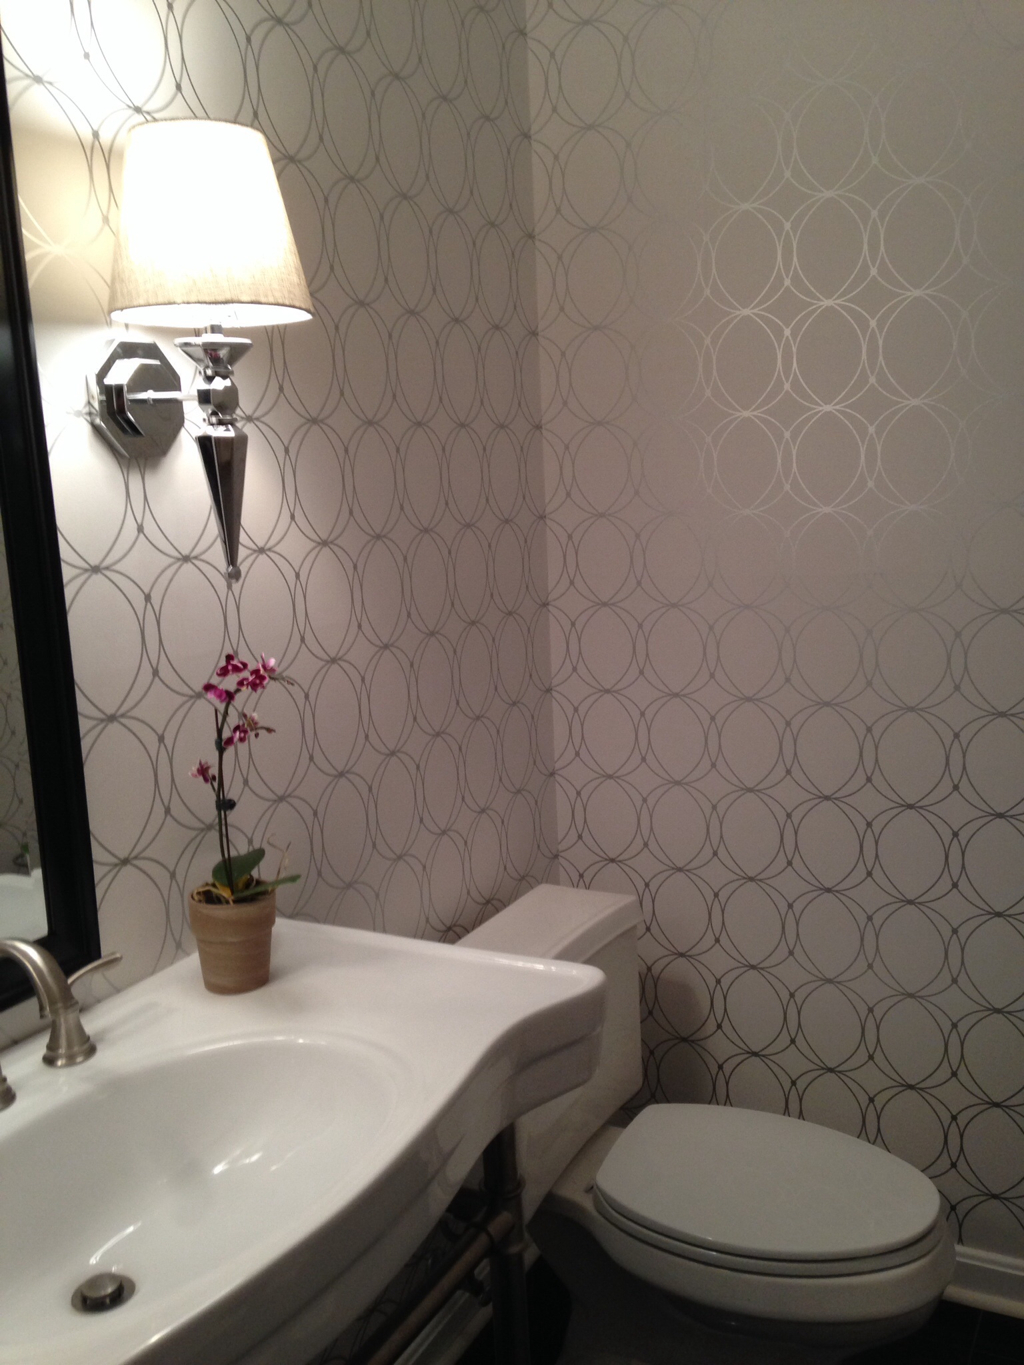 The Look For Less Powder Room Wallpaper